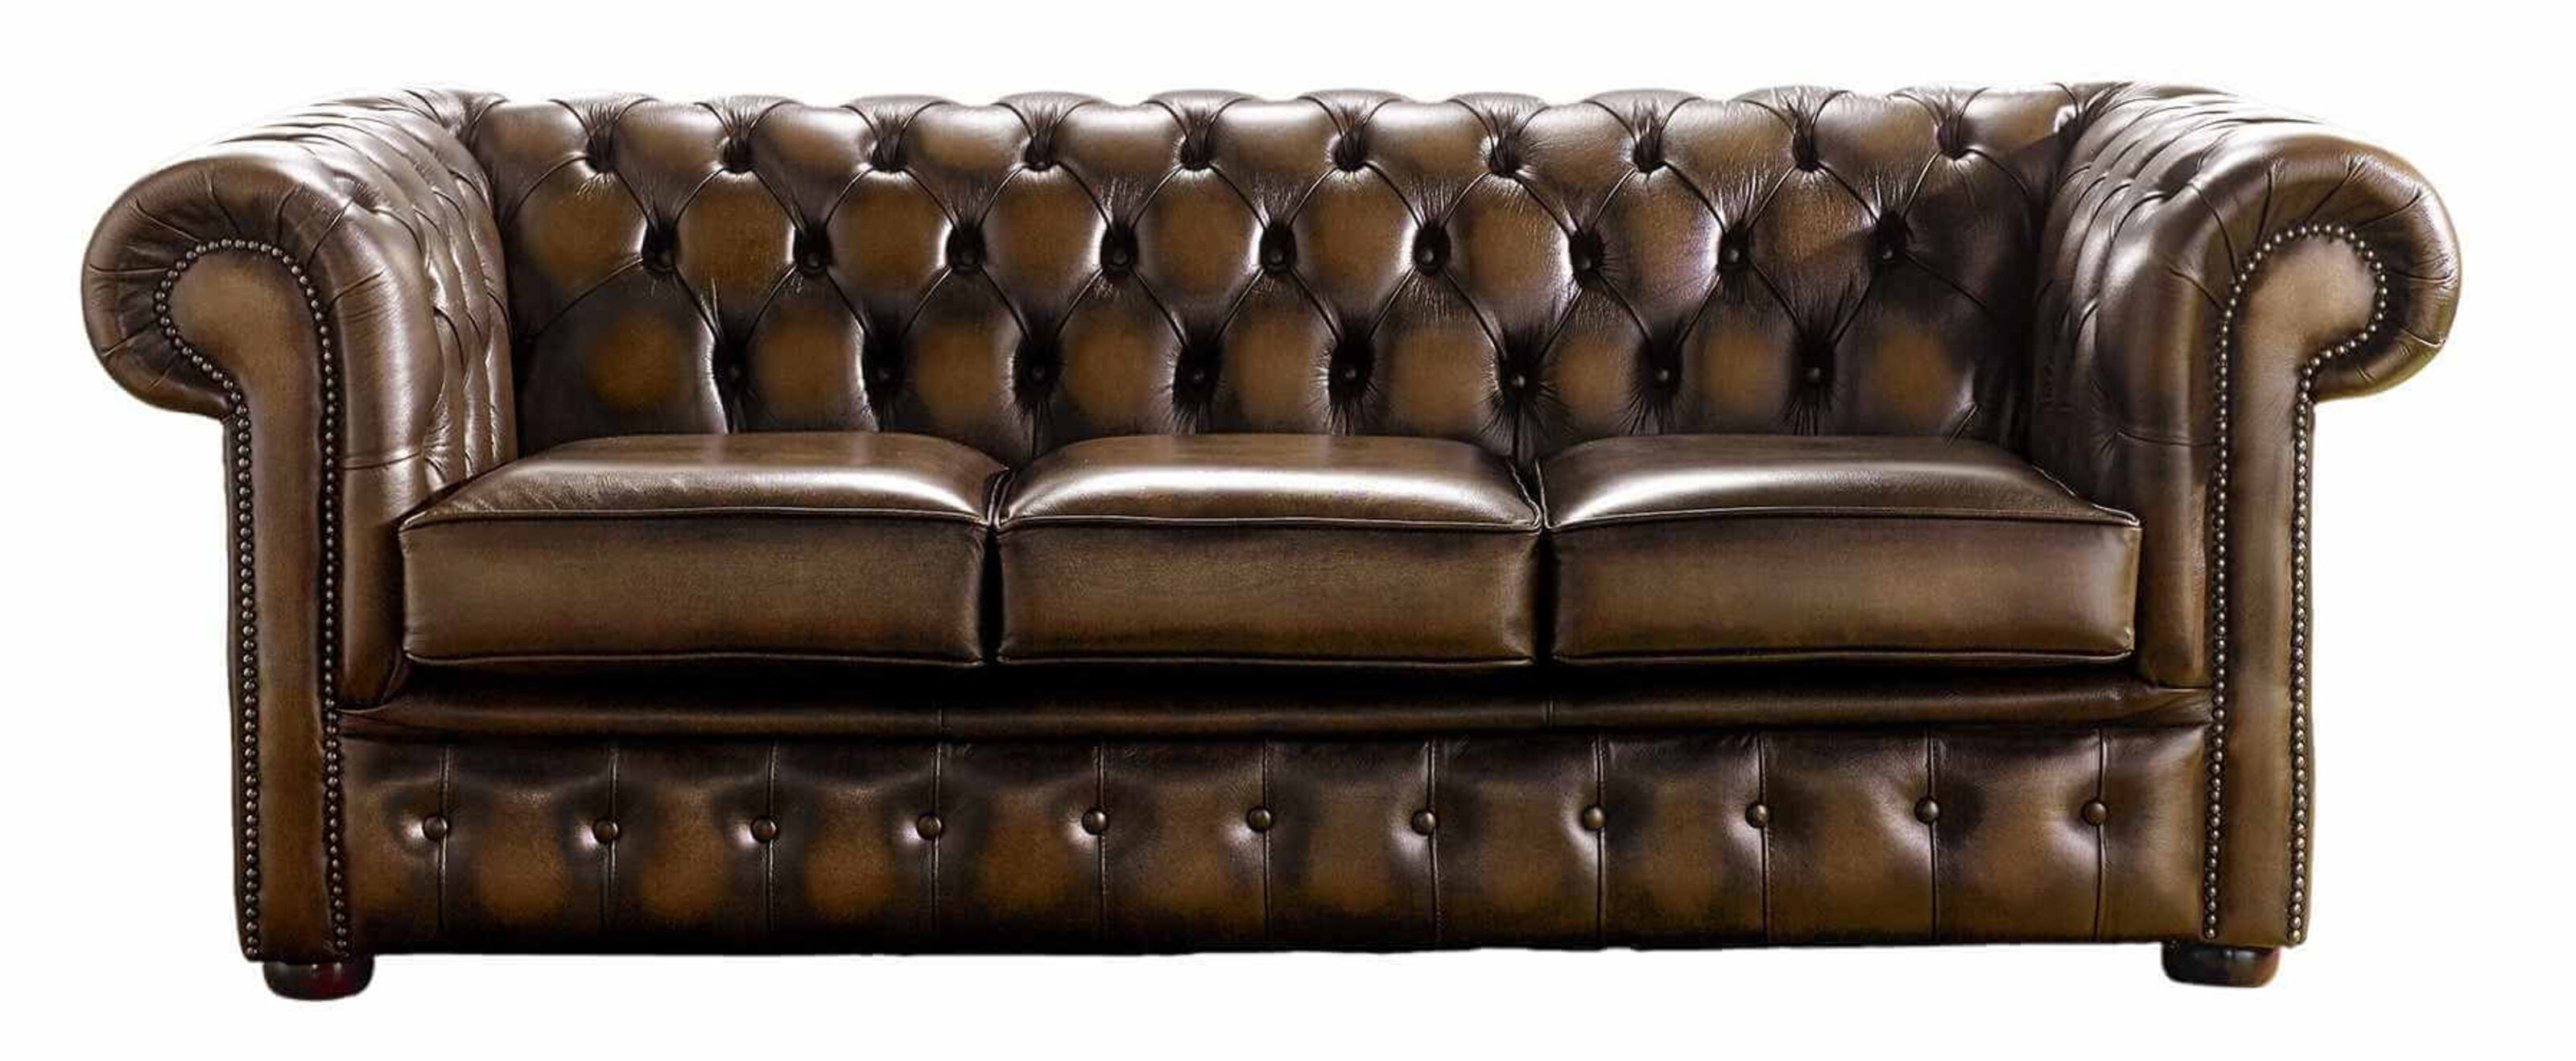 Elevated Comfort Chesterfield Sofa with Chaise Lounge  %Post Title